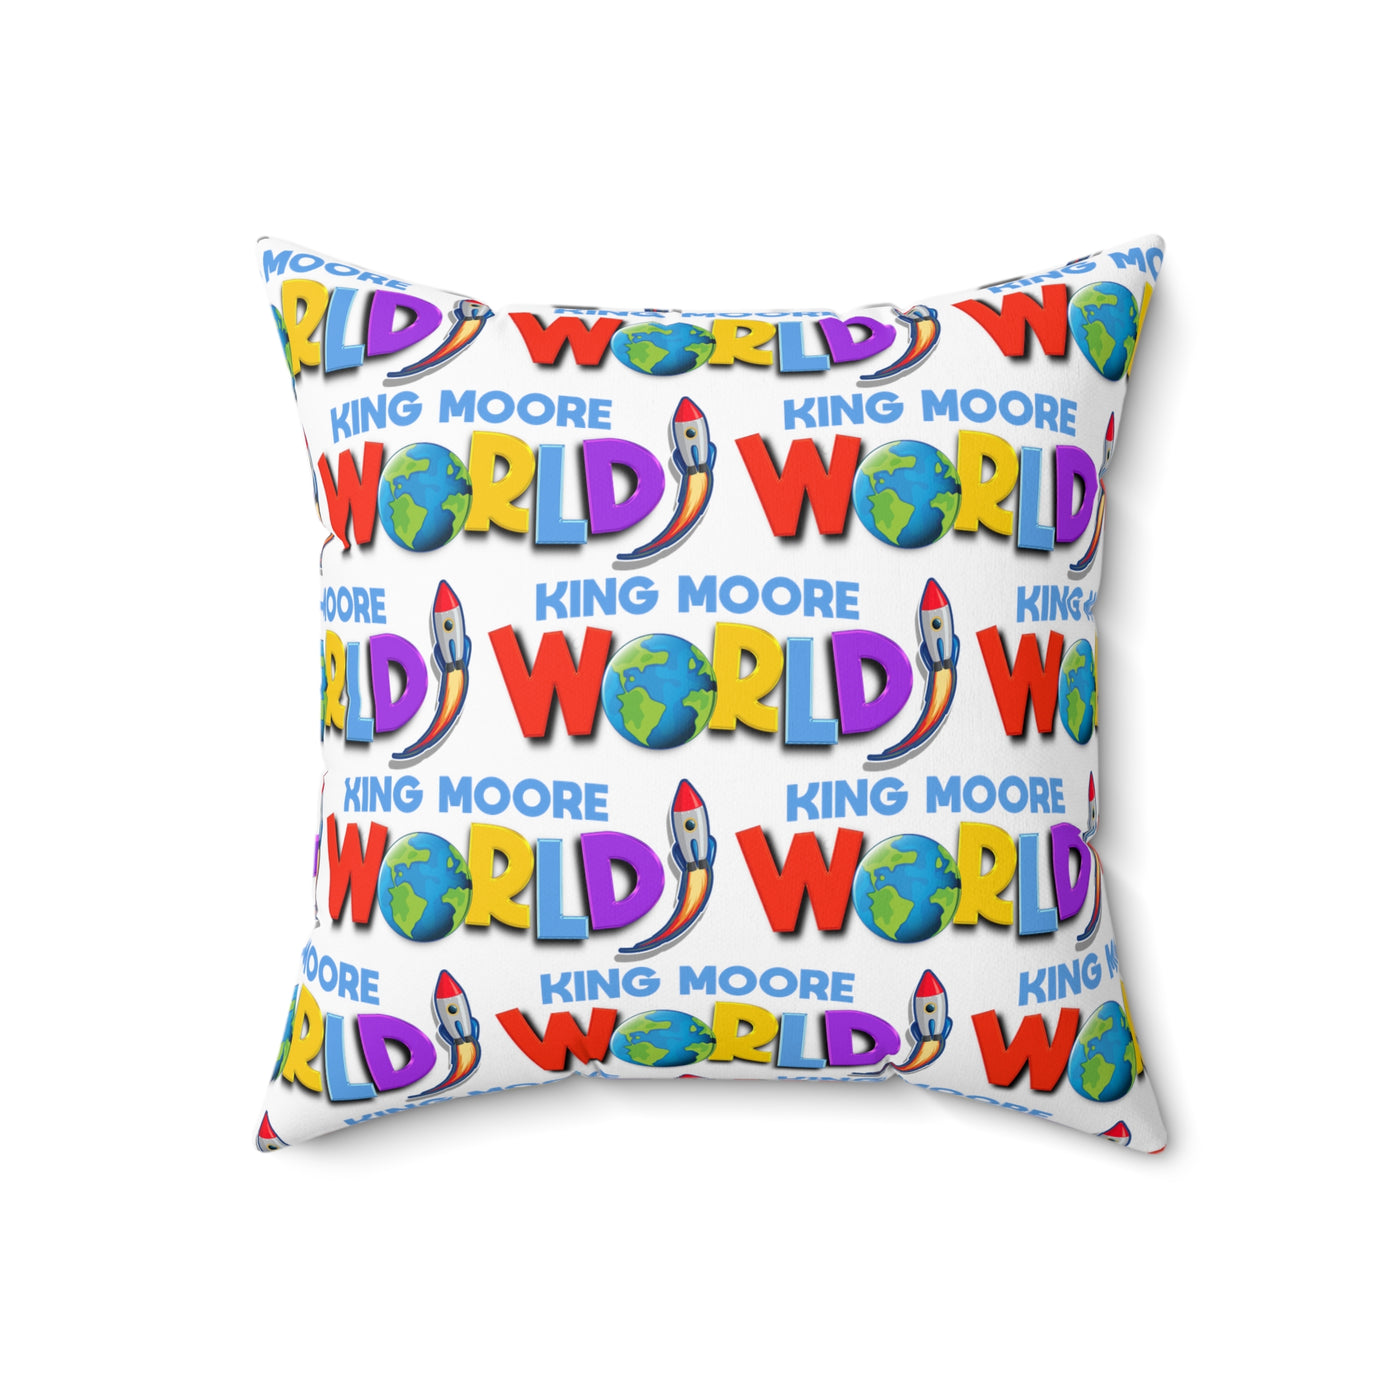 King Moore World Square Pillow